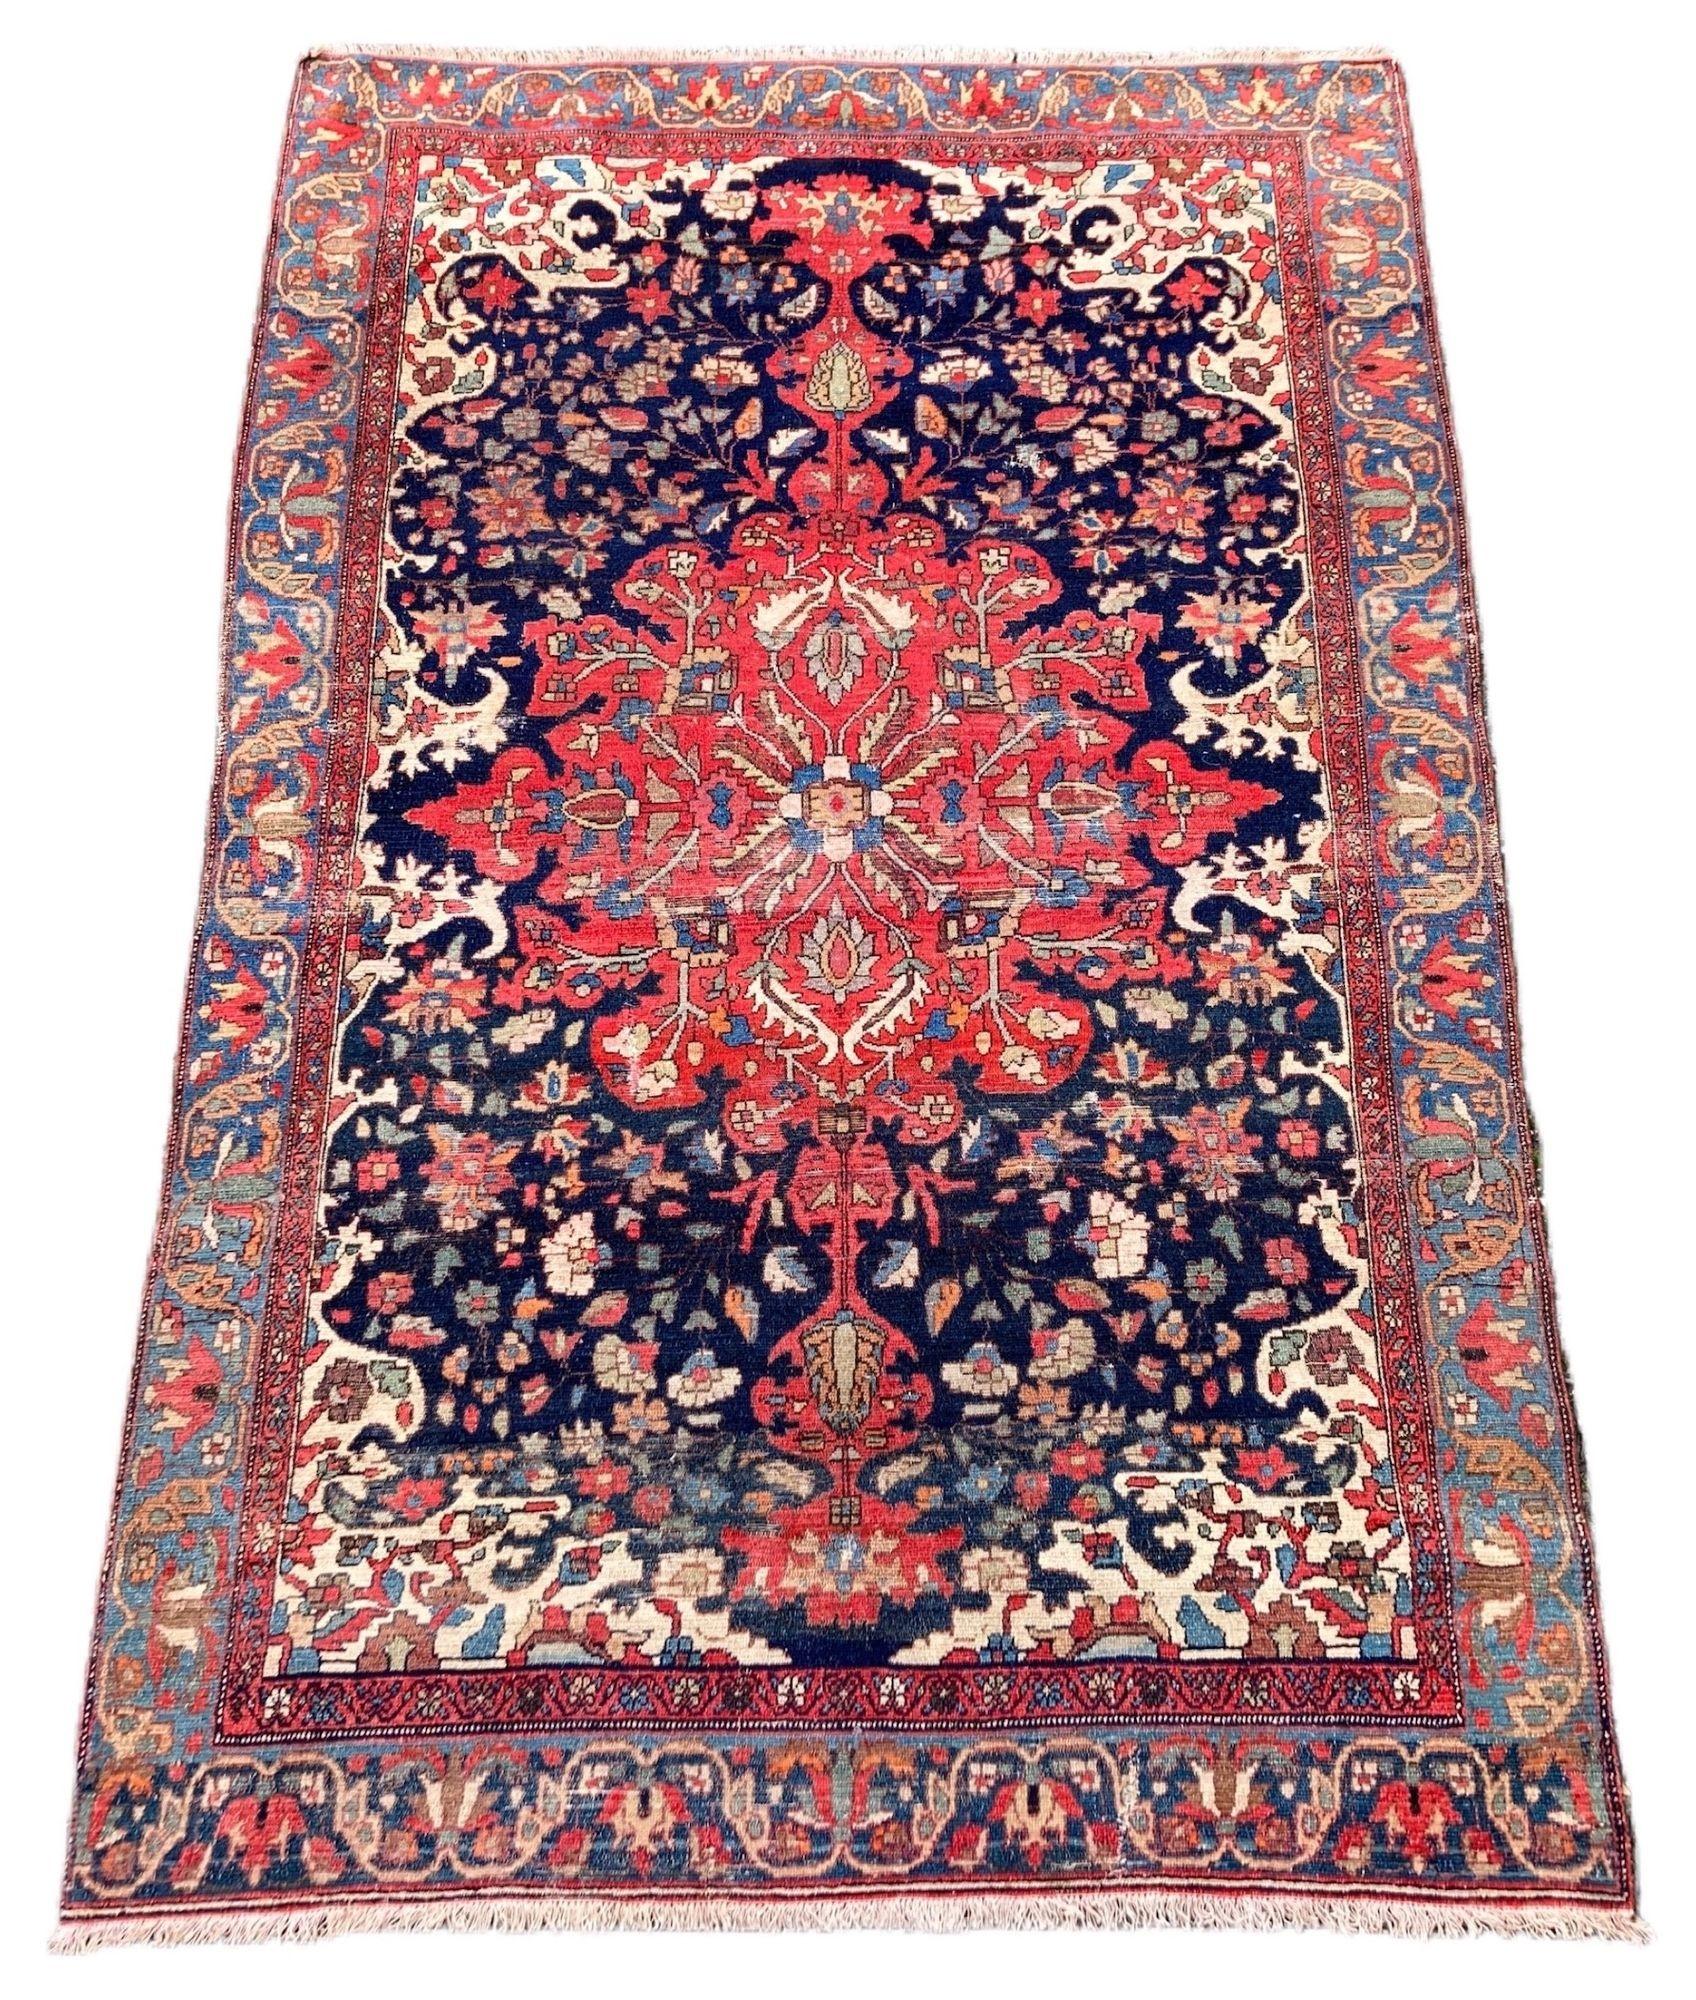 A beautiful antique Malayer rug, hand woven in west Persia circa 1900 with a large tomato red medallion on an indigo field and lighter blue border. It may have lost its outer border somewhere on its journey but retains all of its rustic charm.
Size: